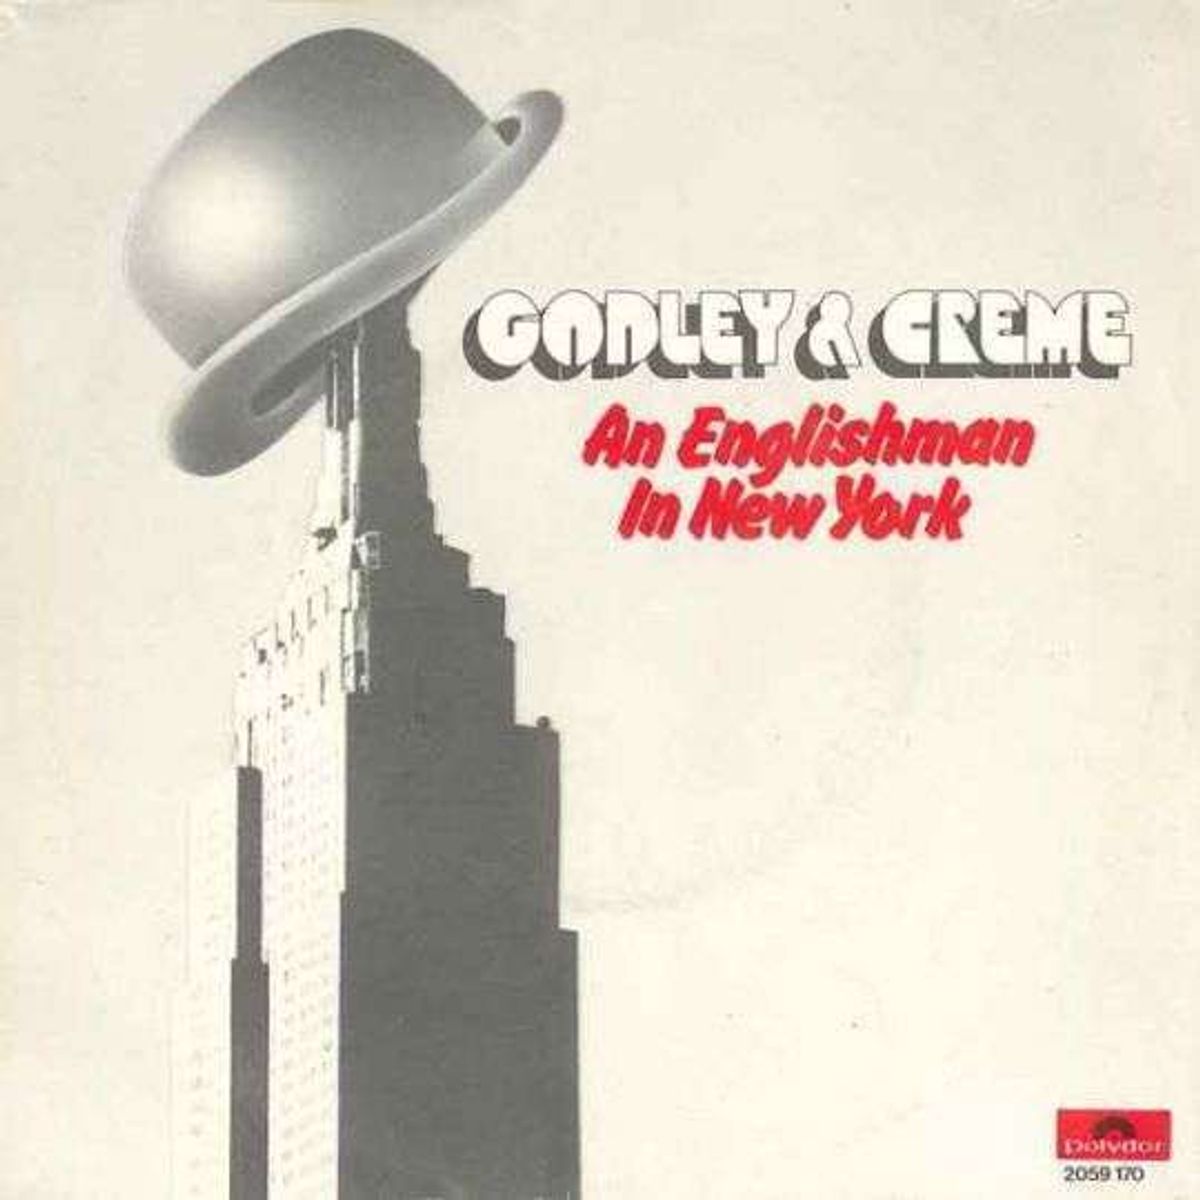 #10ccEtcetera - Godley & Creme - An Englishman In New York (1979)